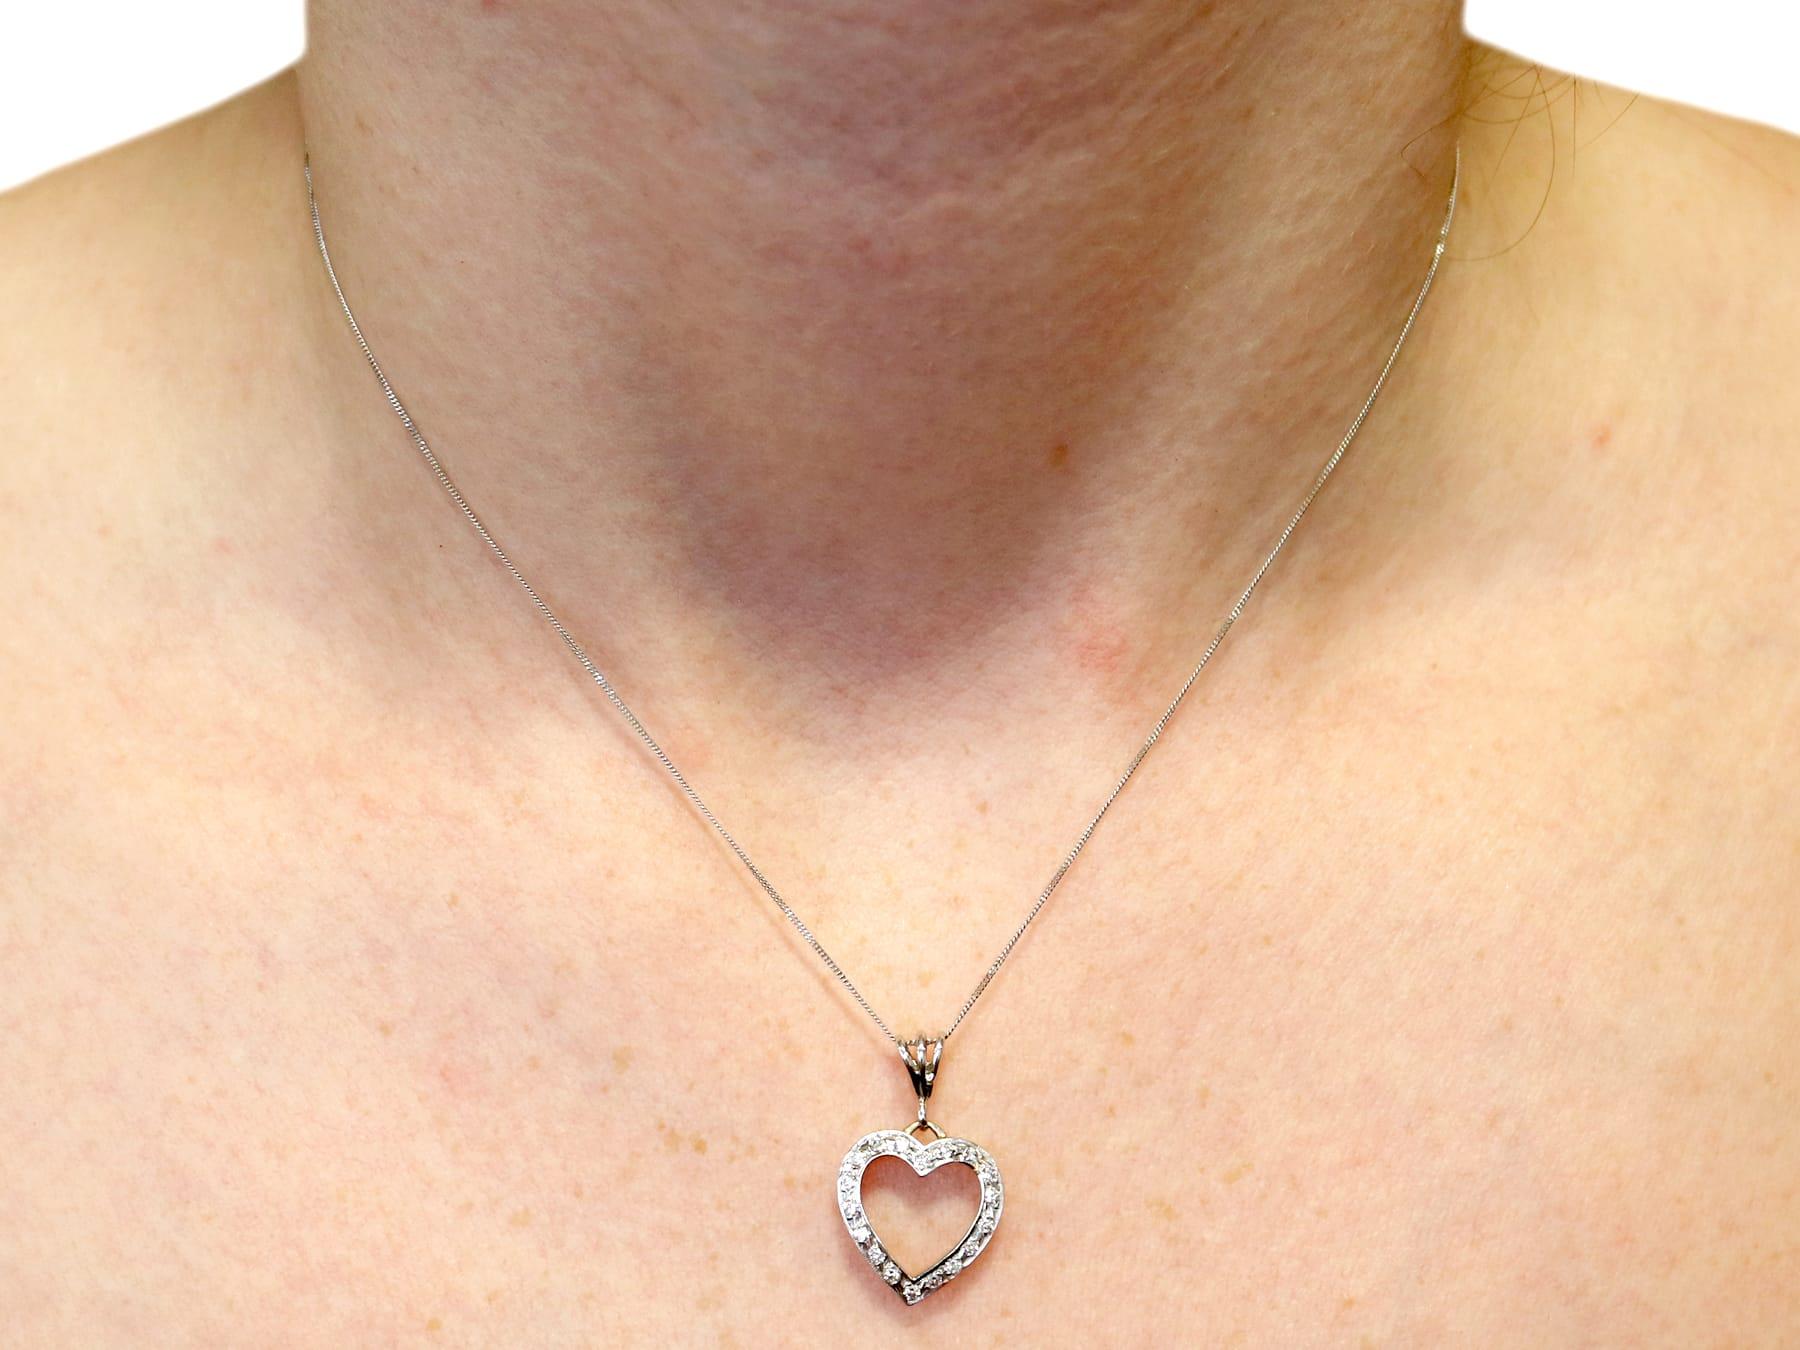 Italian 1960s Diamond and White Gold Heart Pendant/Necklace For Sale 2